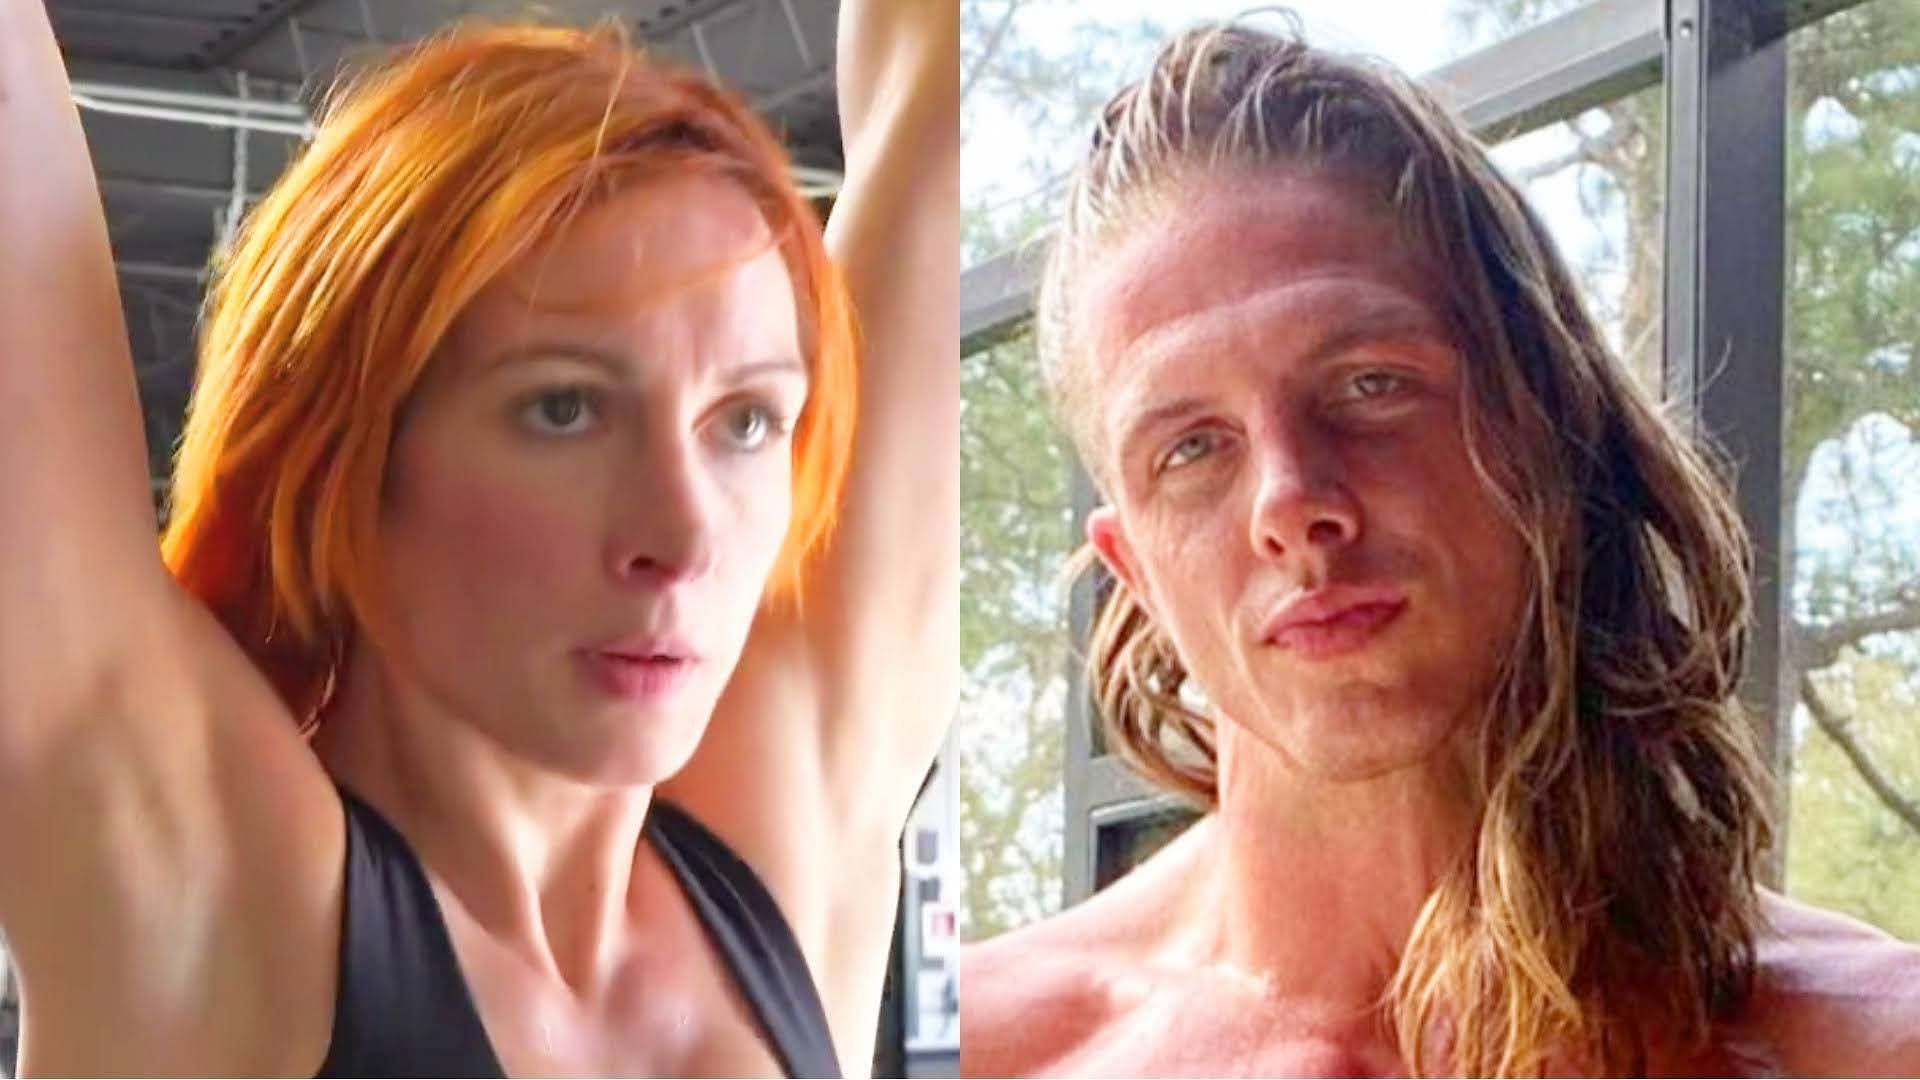 Becky Lynch (left) and Matt Riddle (right) are top stars on WWE RAW